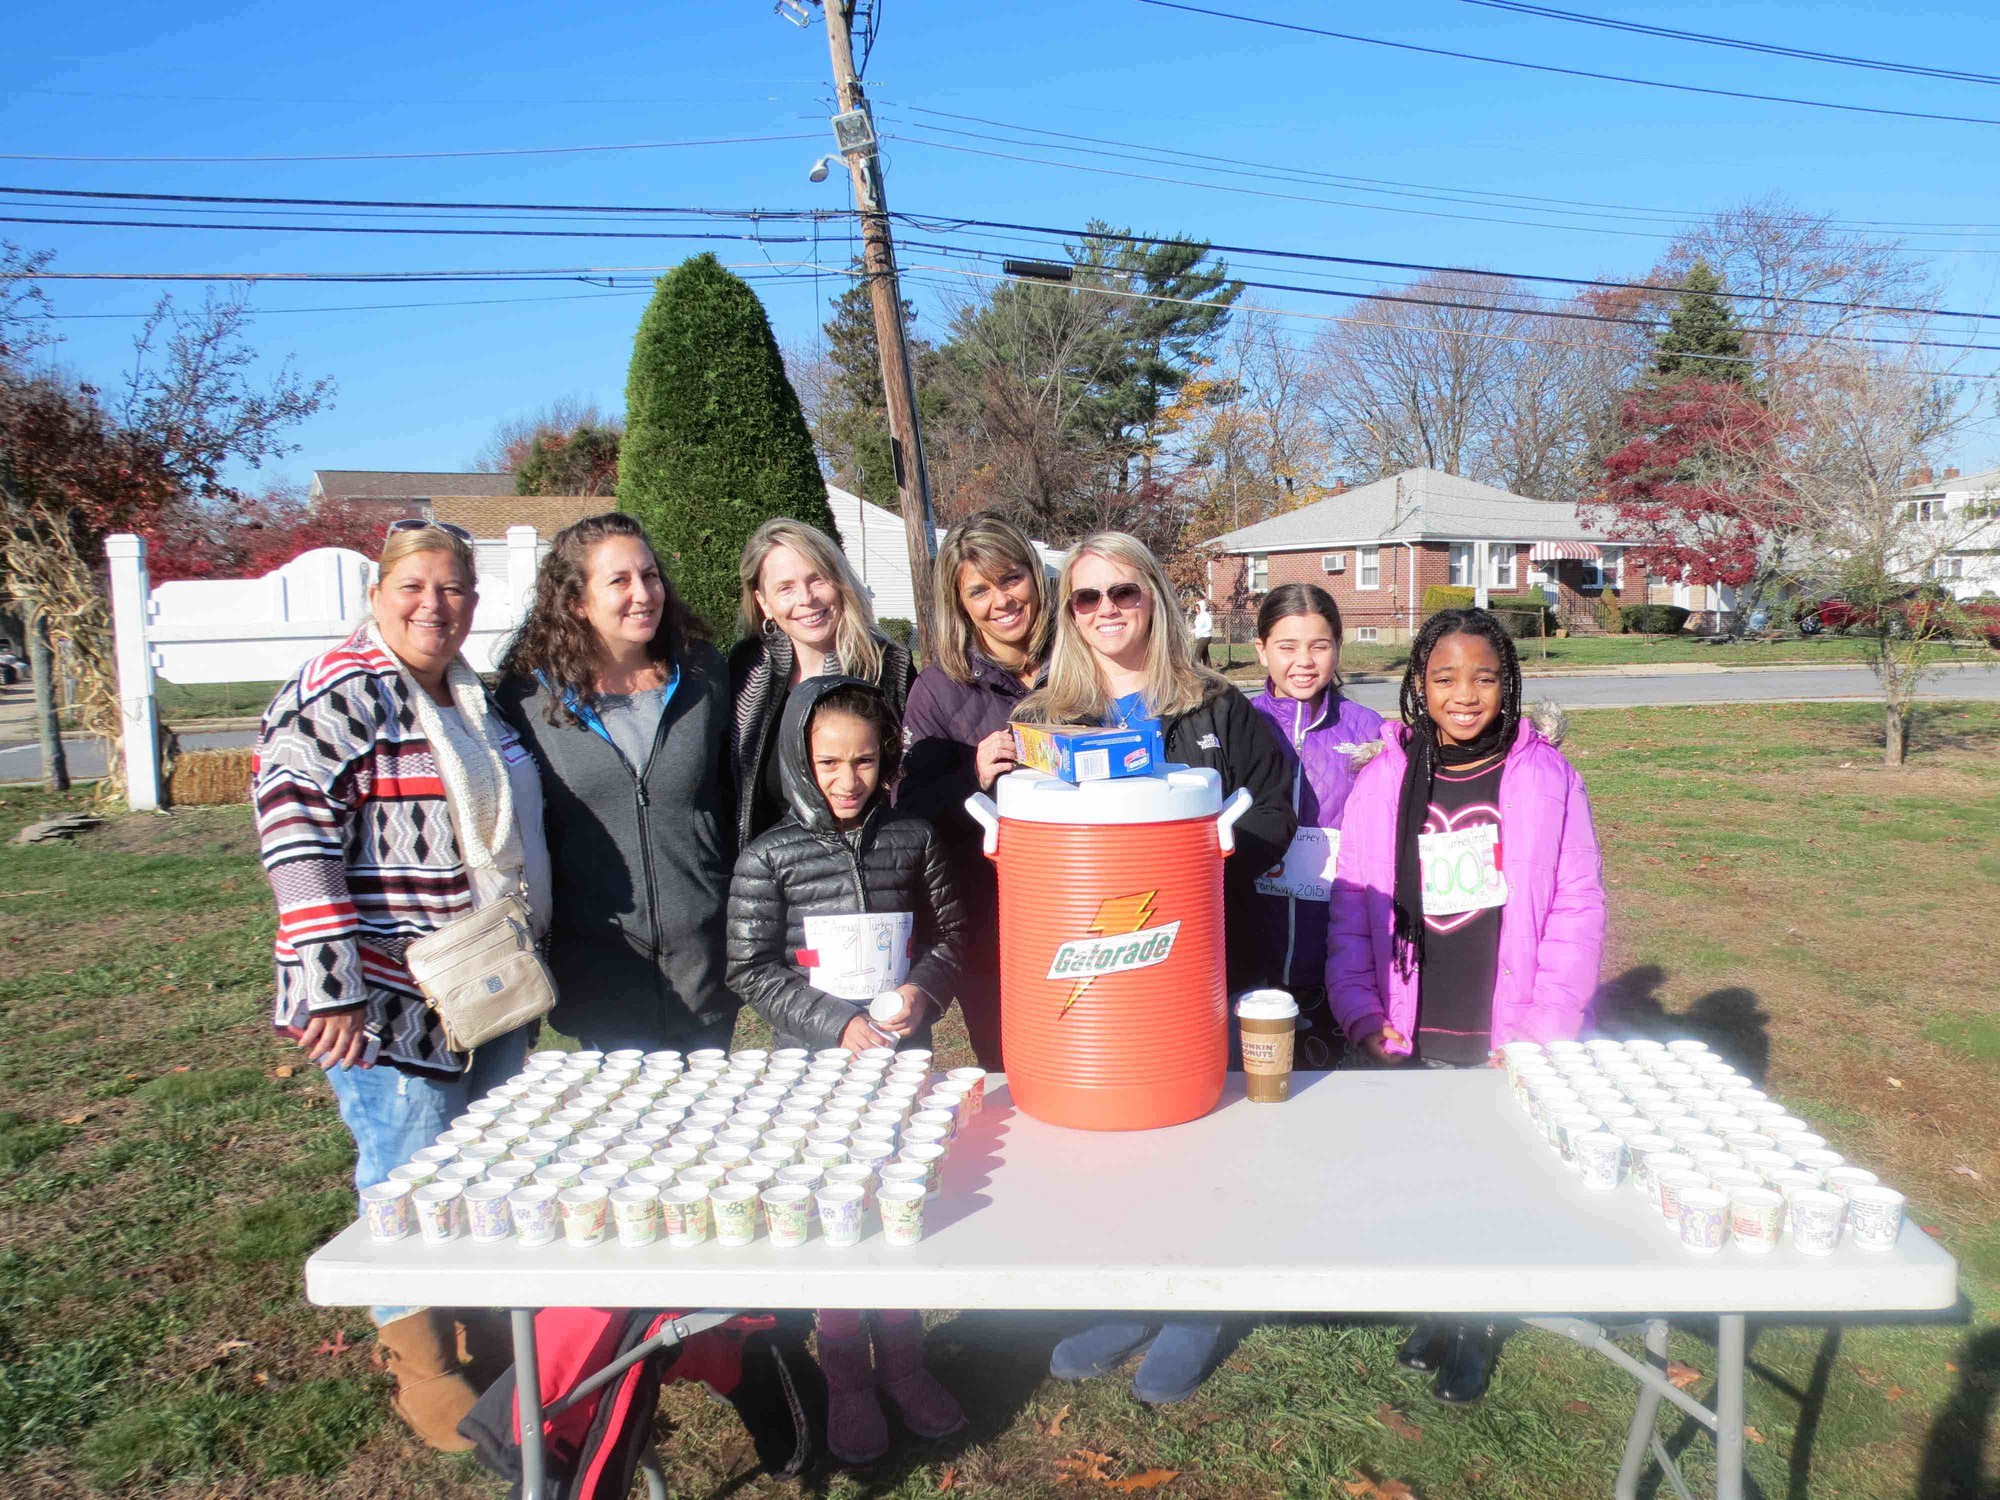 Parkway PTA members cheered the children on and handed them cups of water during the run.